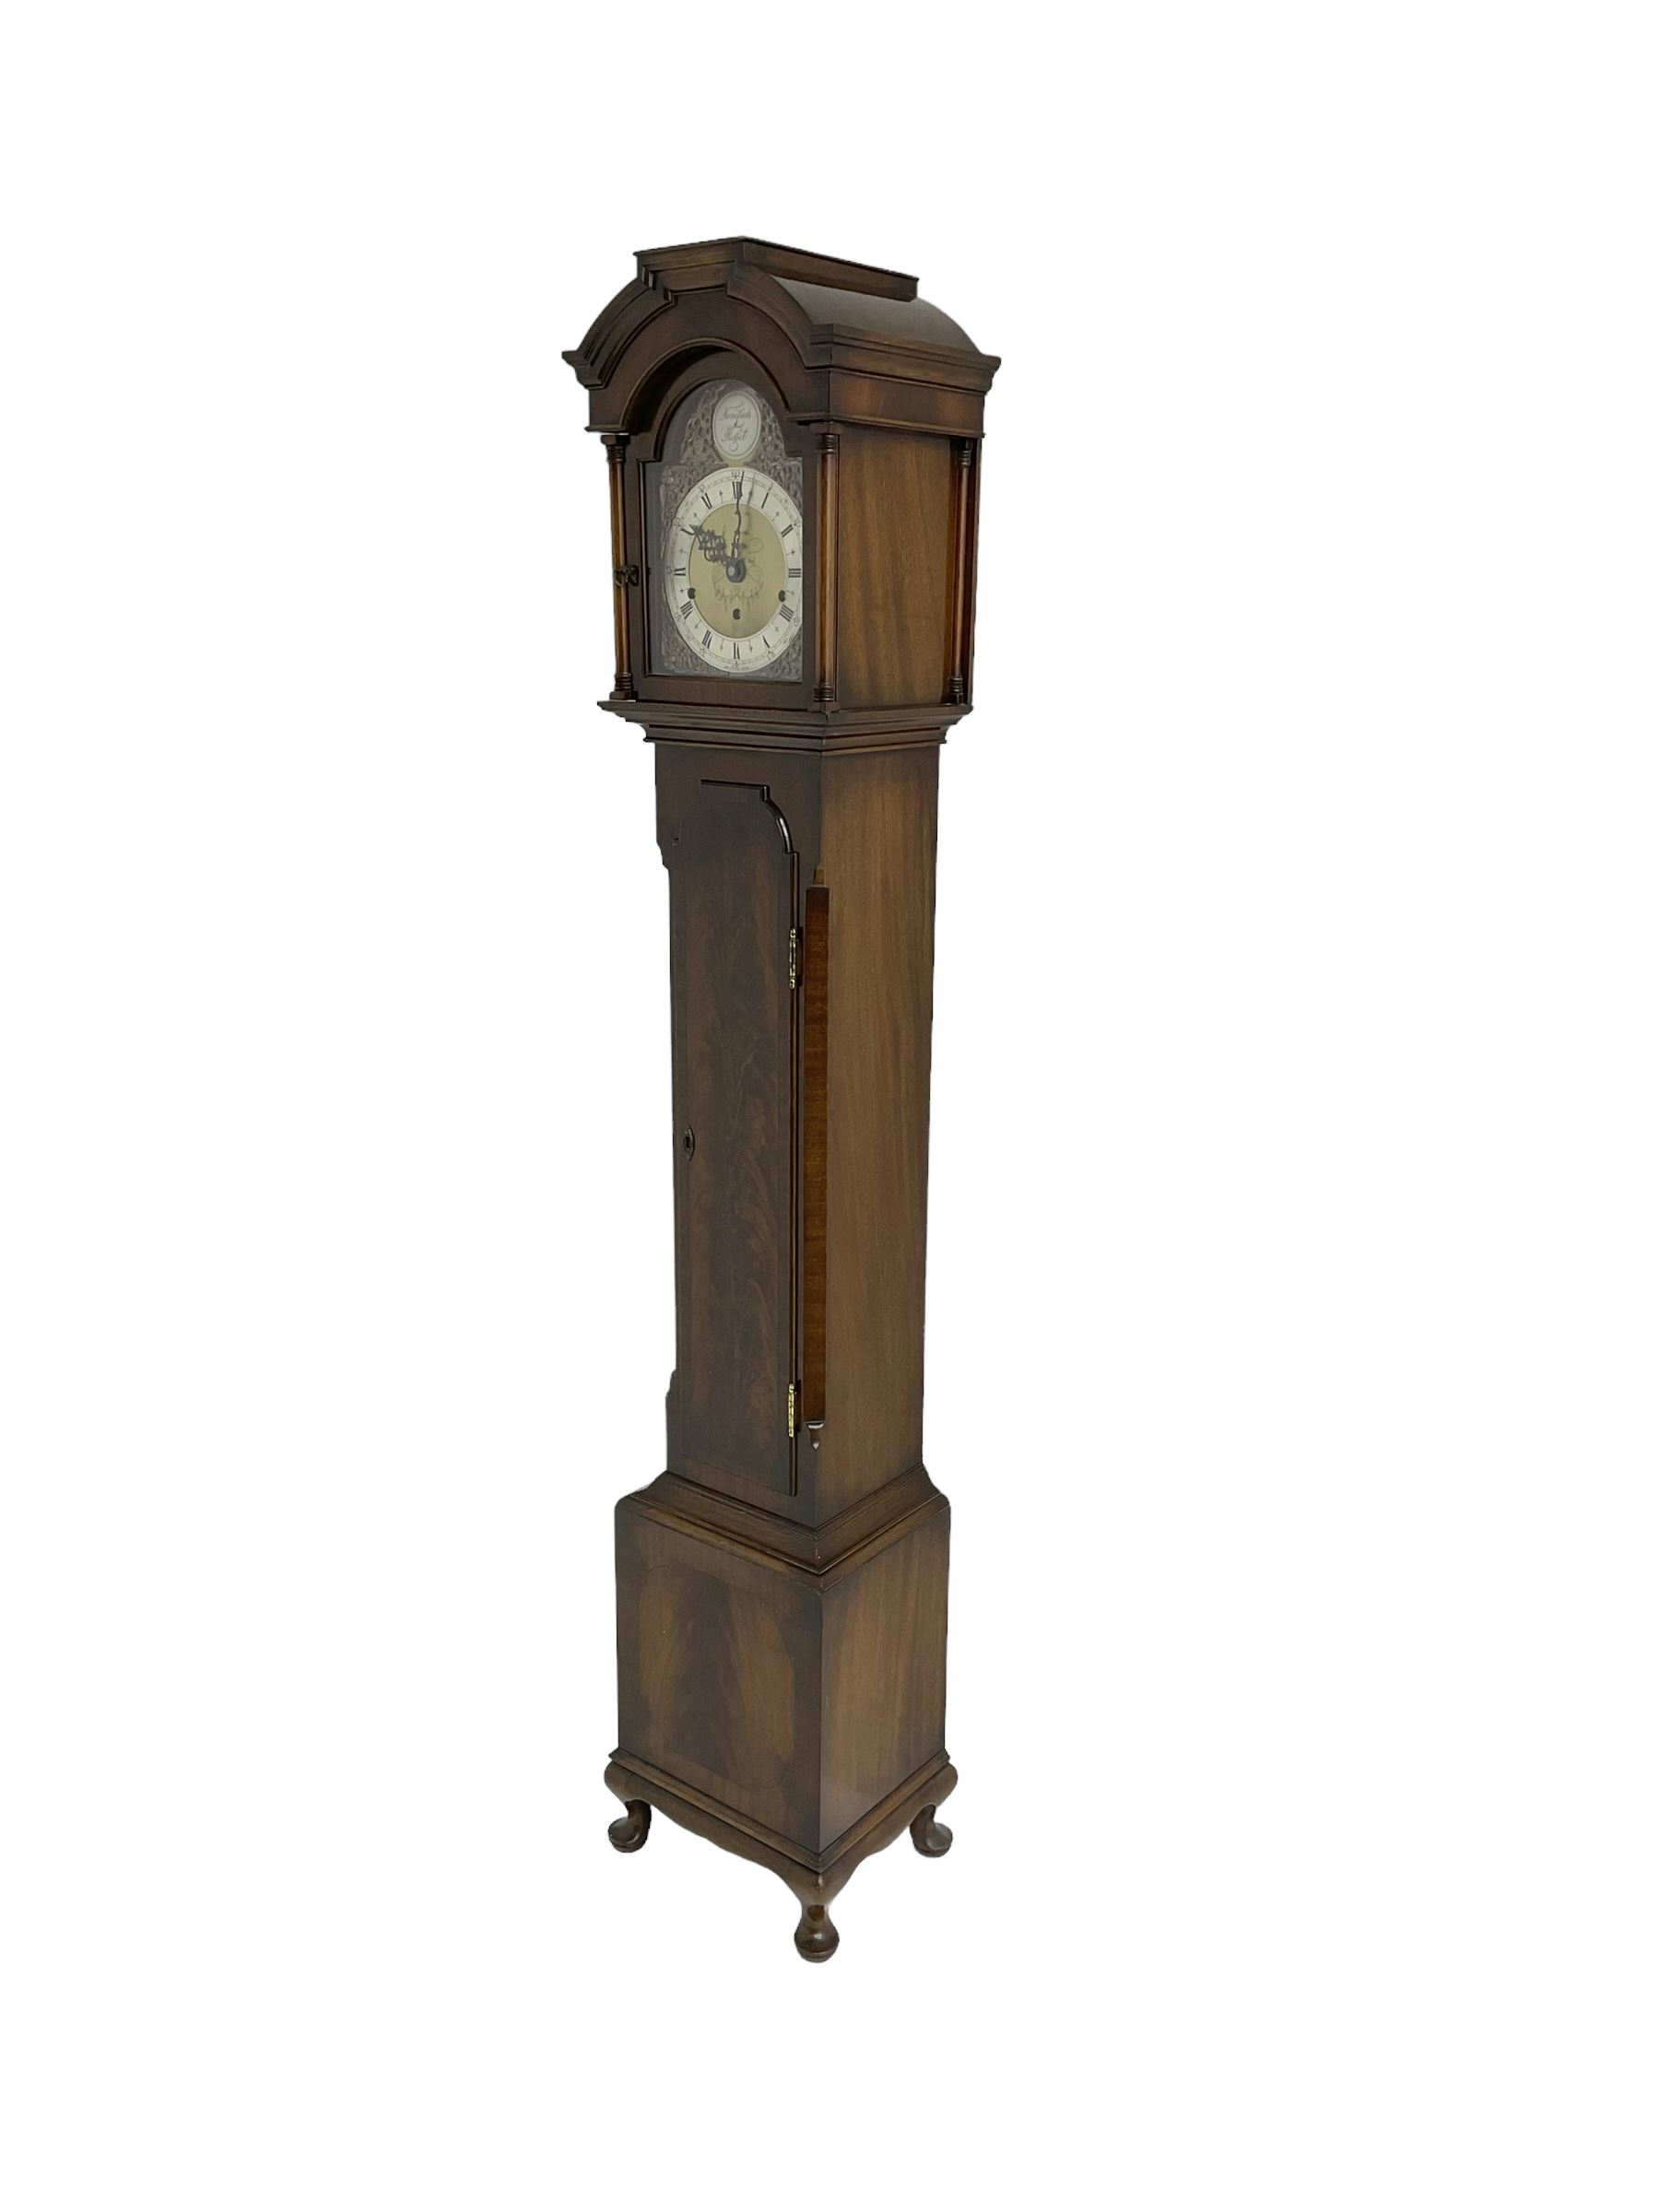 20th century Westminster chiming Grandmother clock - Mahogany case with a three train Elliot movemen - Image 2 of 4